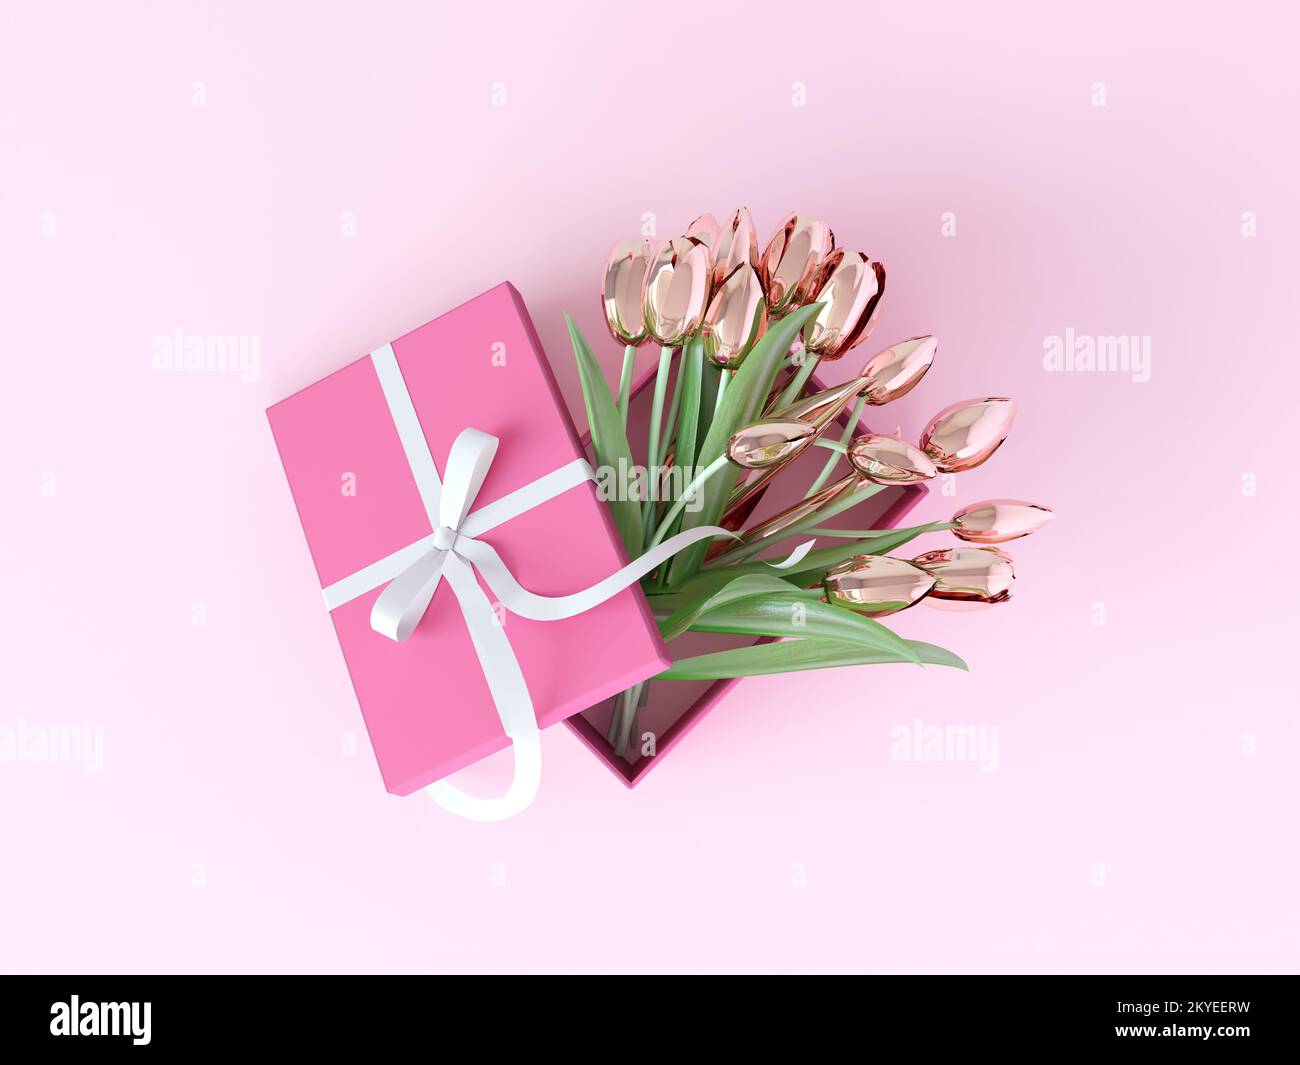 Golden tulips in a gift box with satin ribbon bow on a pastel pink background top view. Copy space, 3d illustration. View from above, minimal concept. Stock Photo